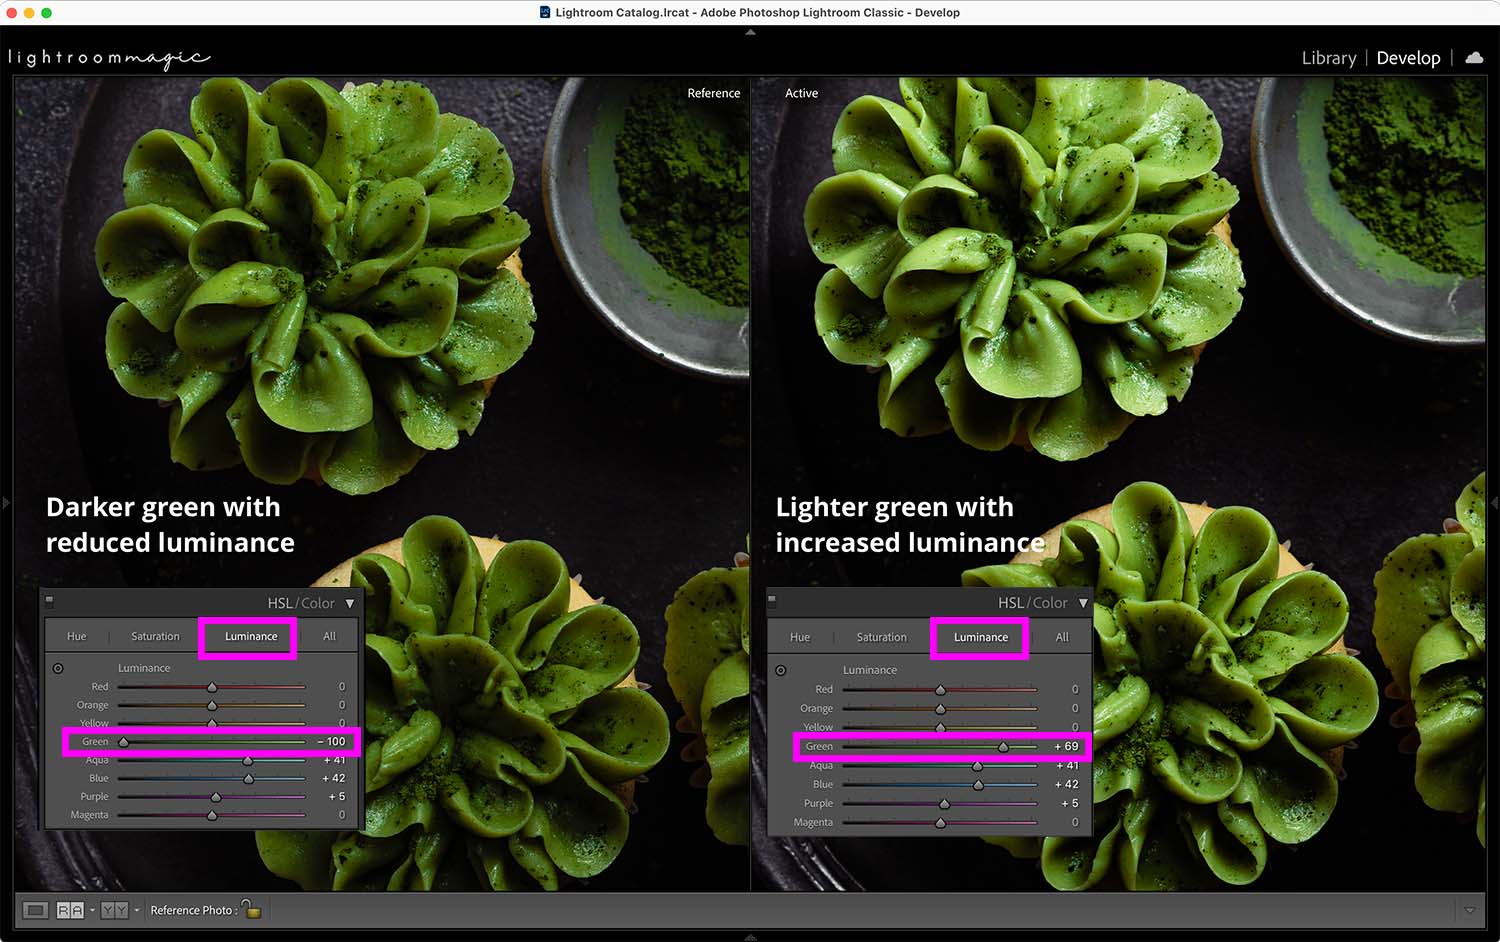 Screenshot of edit color in Lightroom. Showing Reduced luminance vs increased luminance of green.